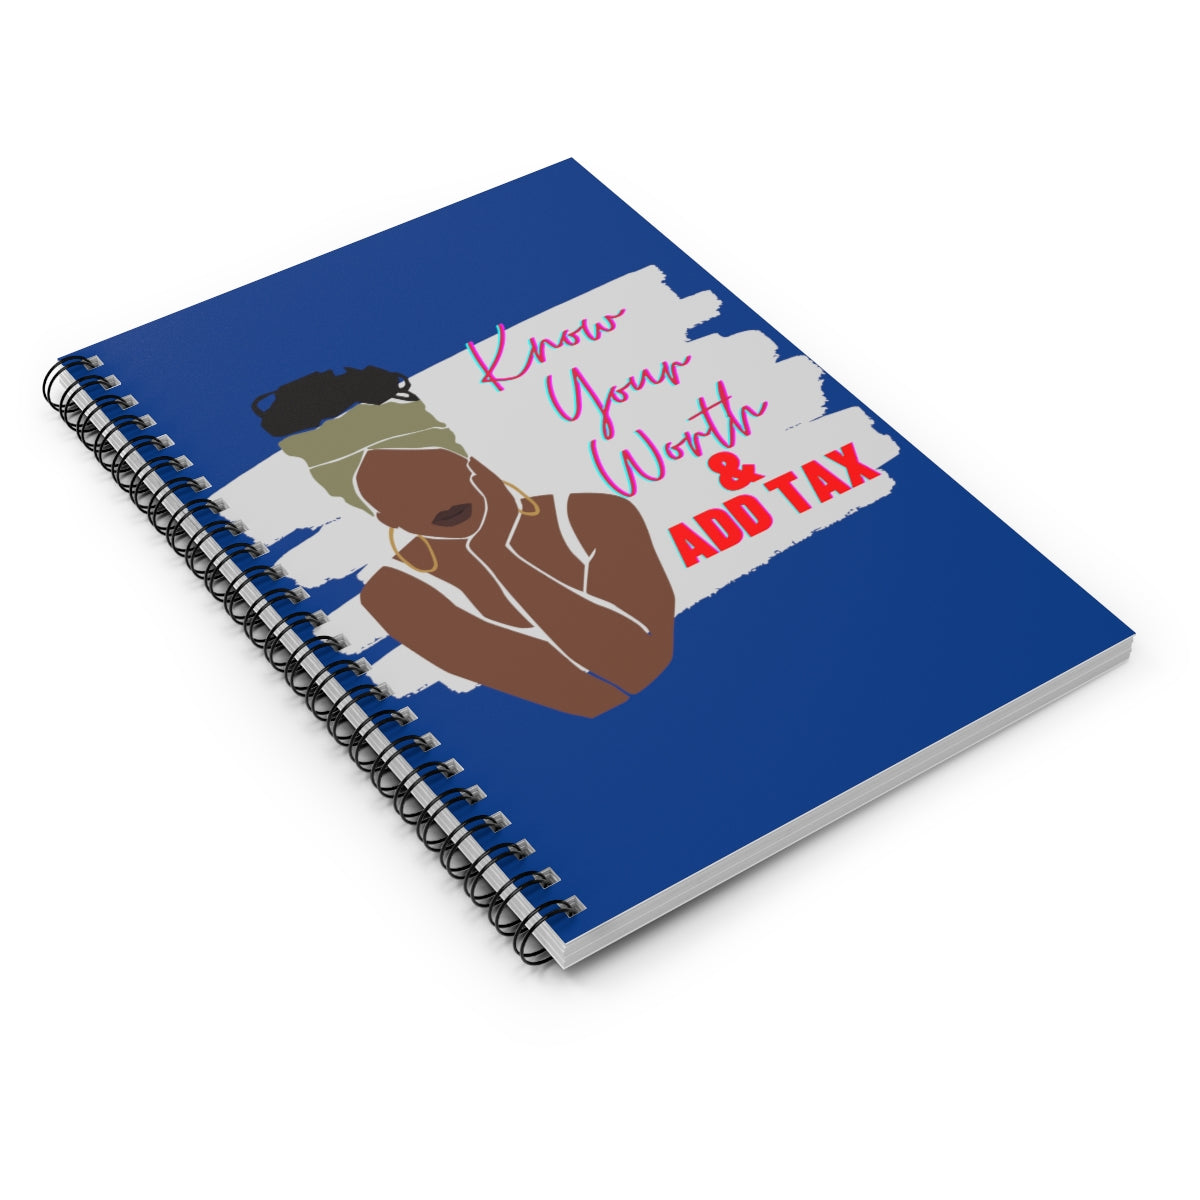 Know Your Worth & Add Tax Blue Spiral Notebook - Ruled Line